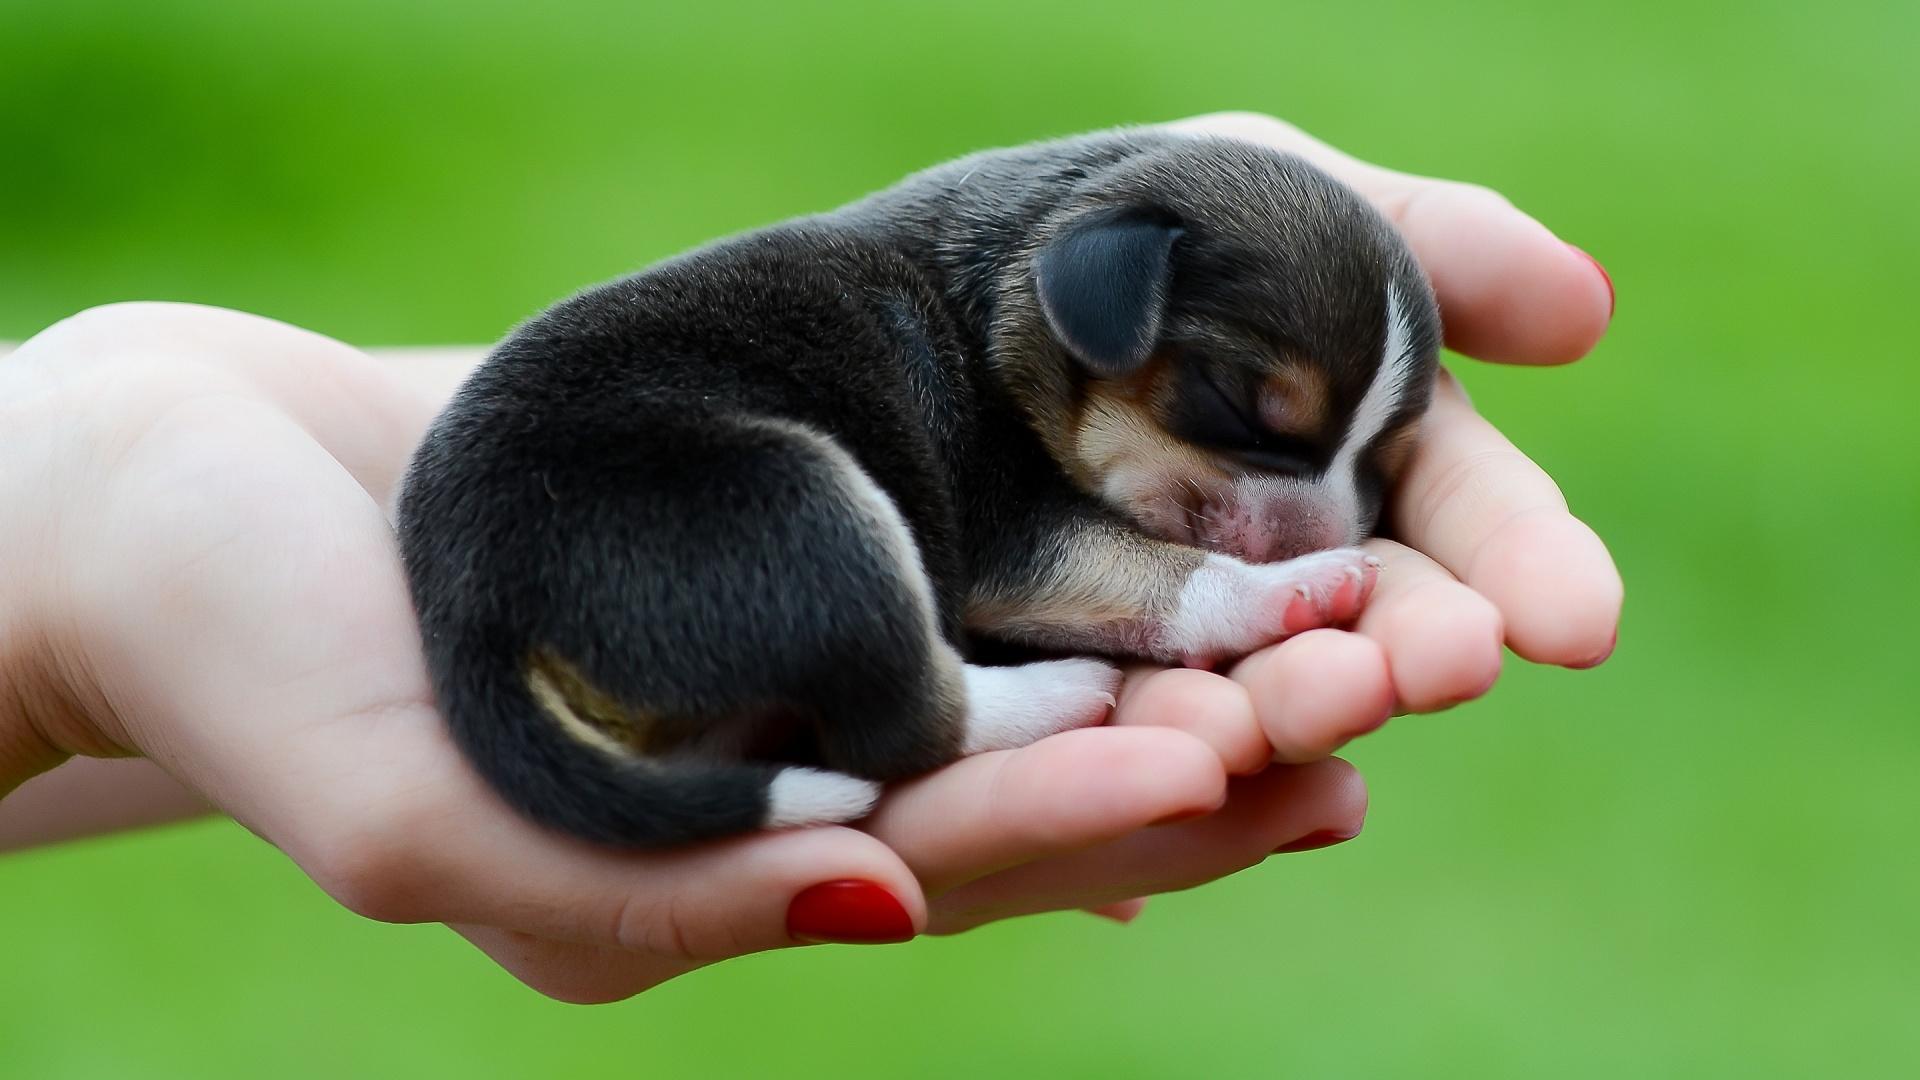 Baby Puppy Wallpapers - Wallpaper Cave